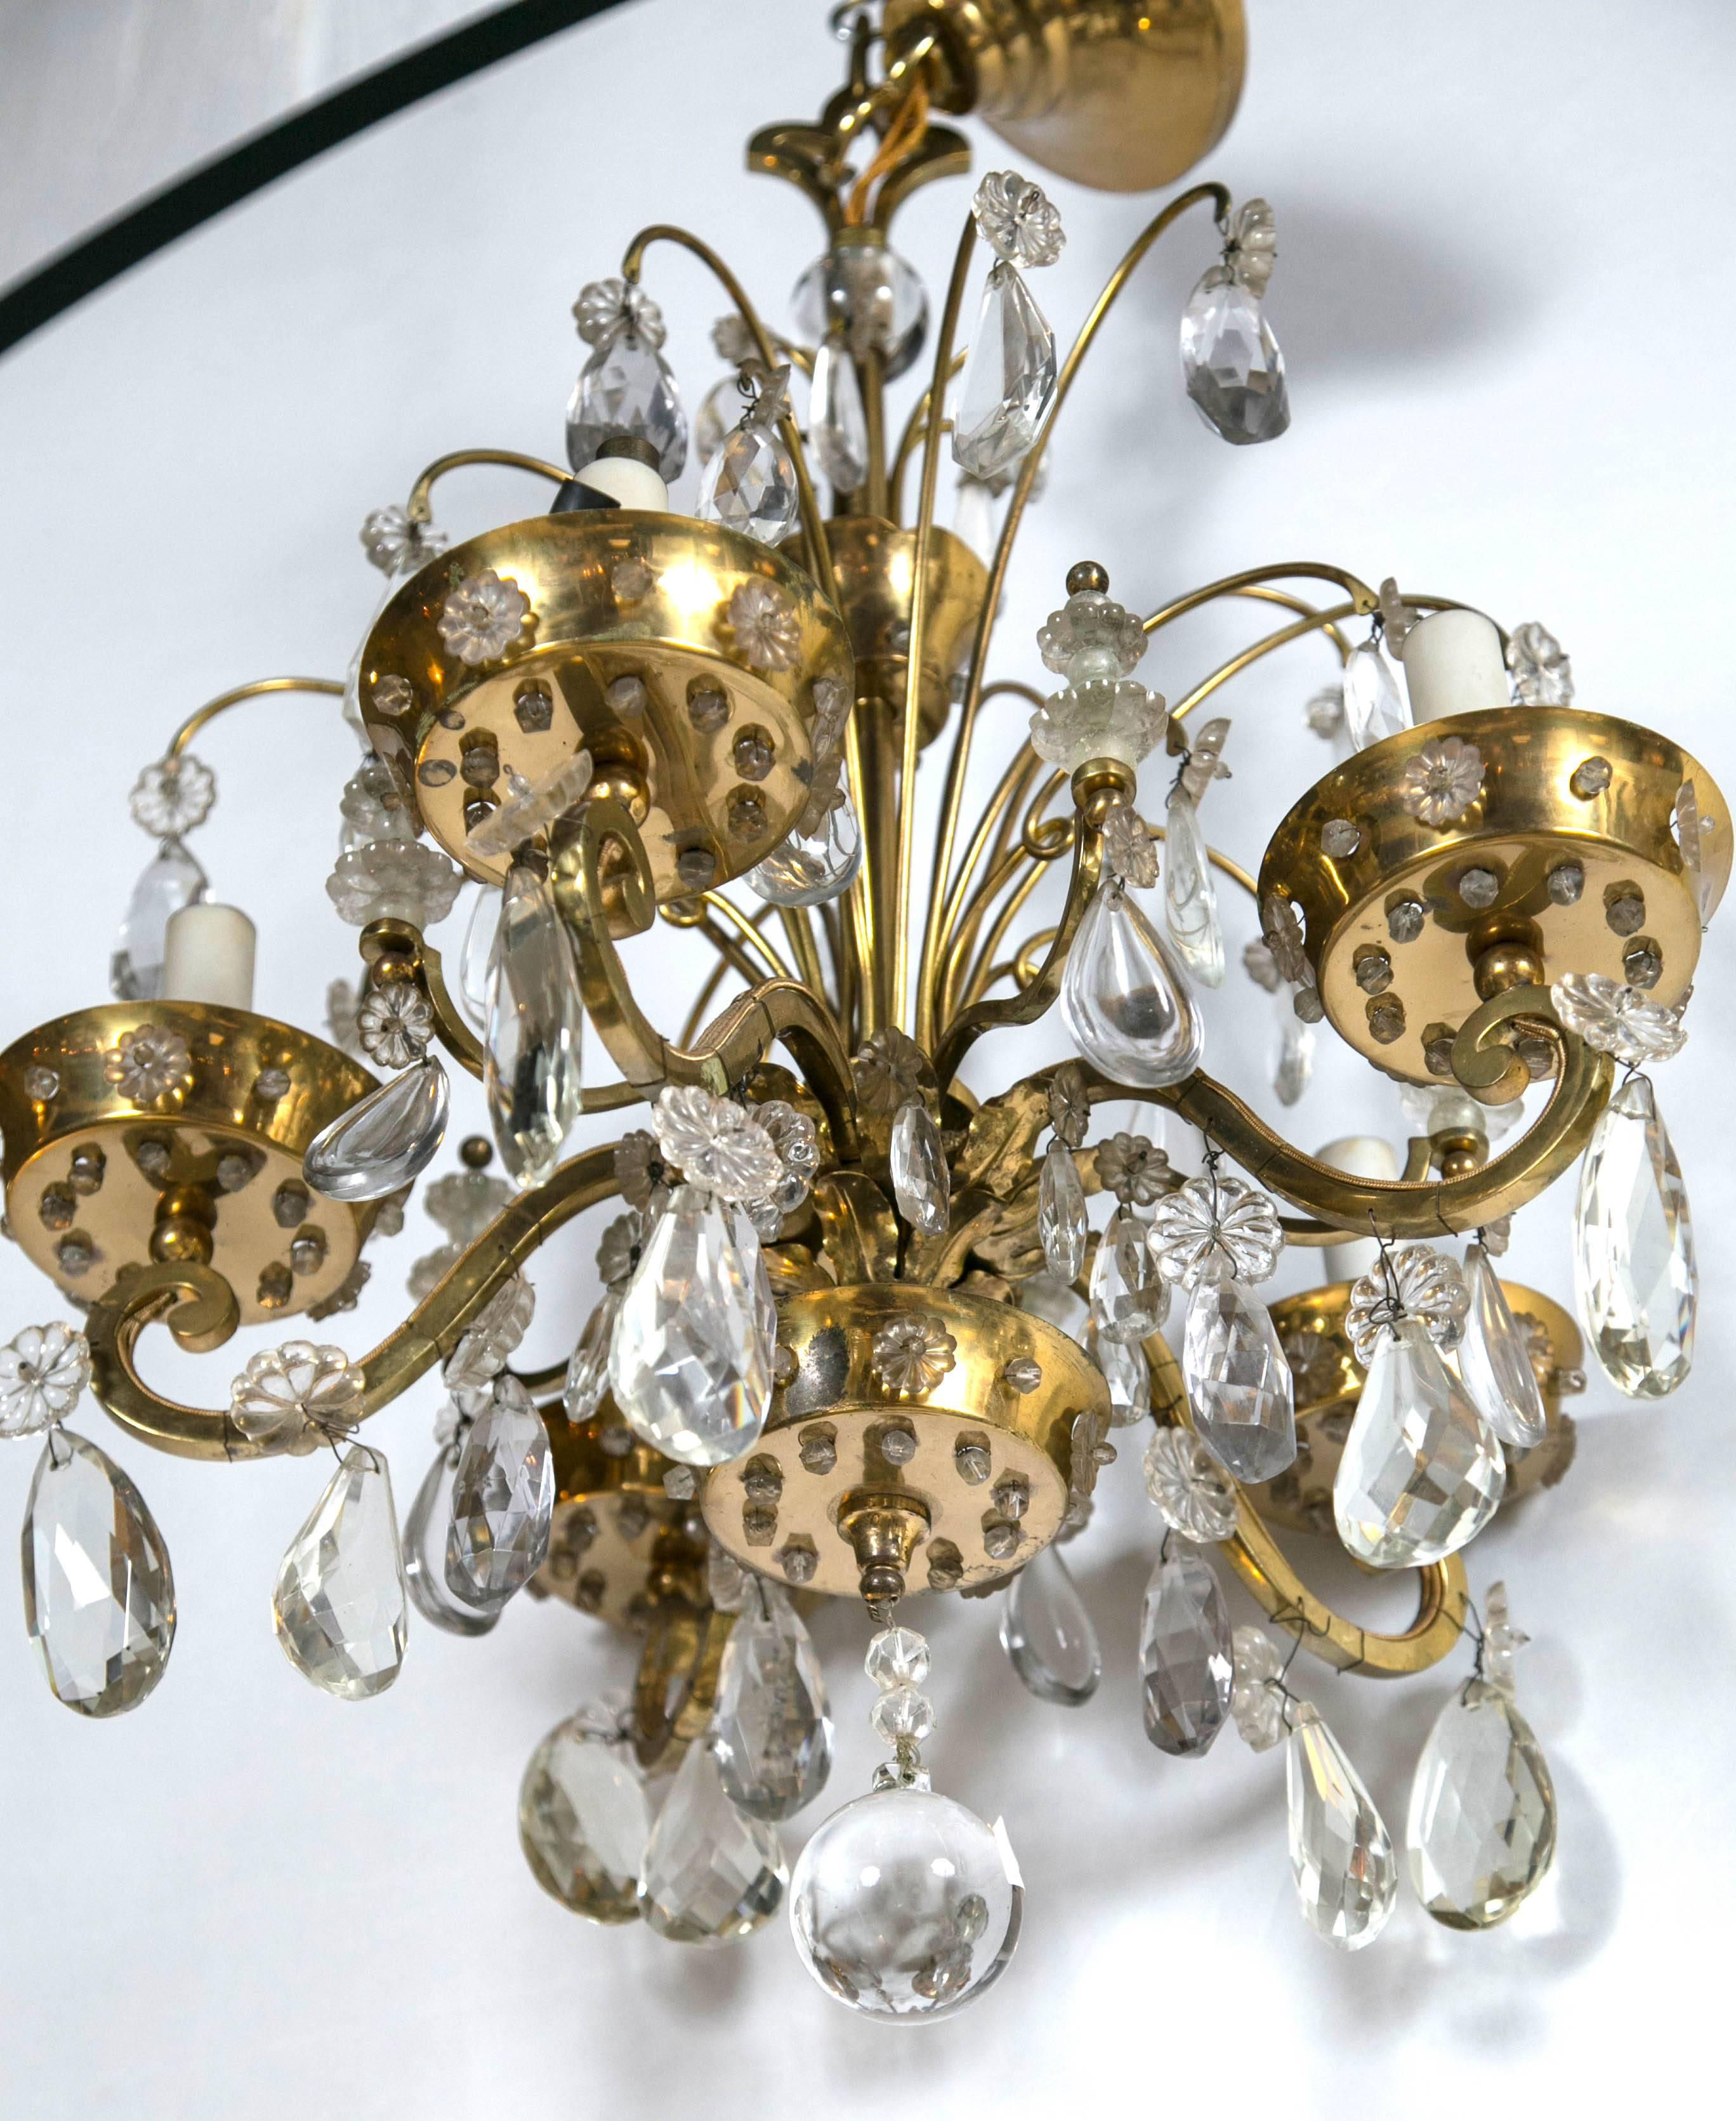 Mid-20th Century A Fine Bronze And Crystal French Art Deco Chandelier by Maison Jansen Five Arm